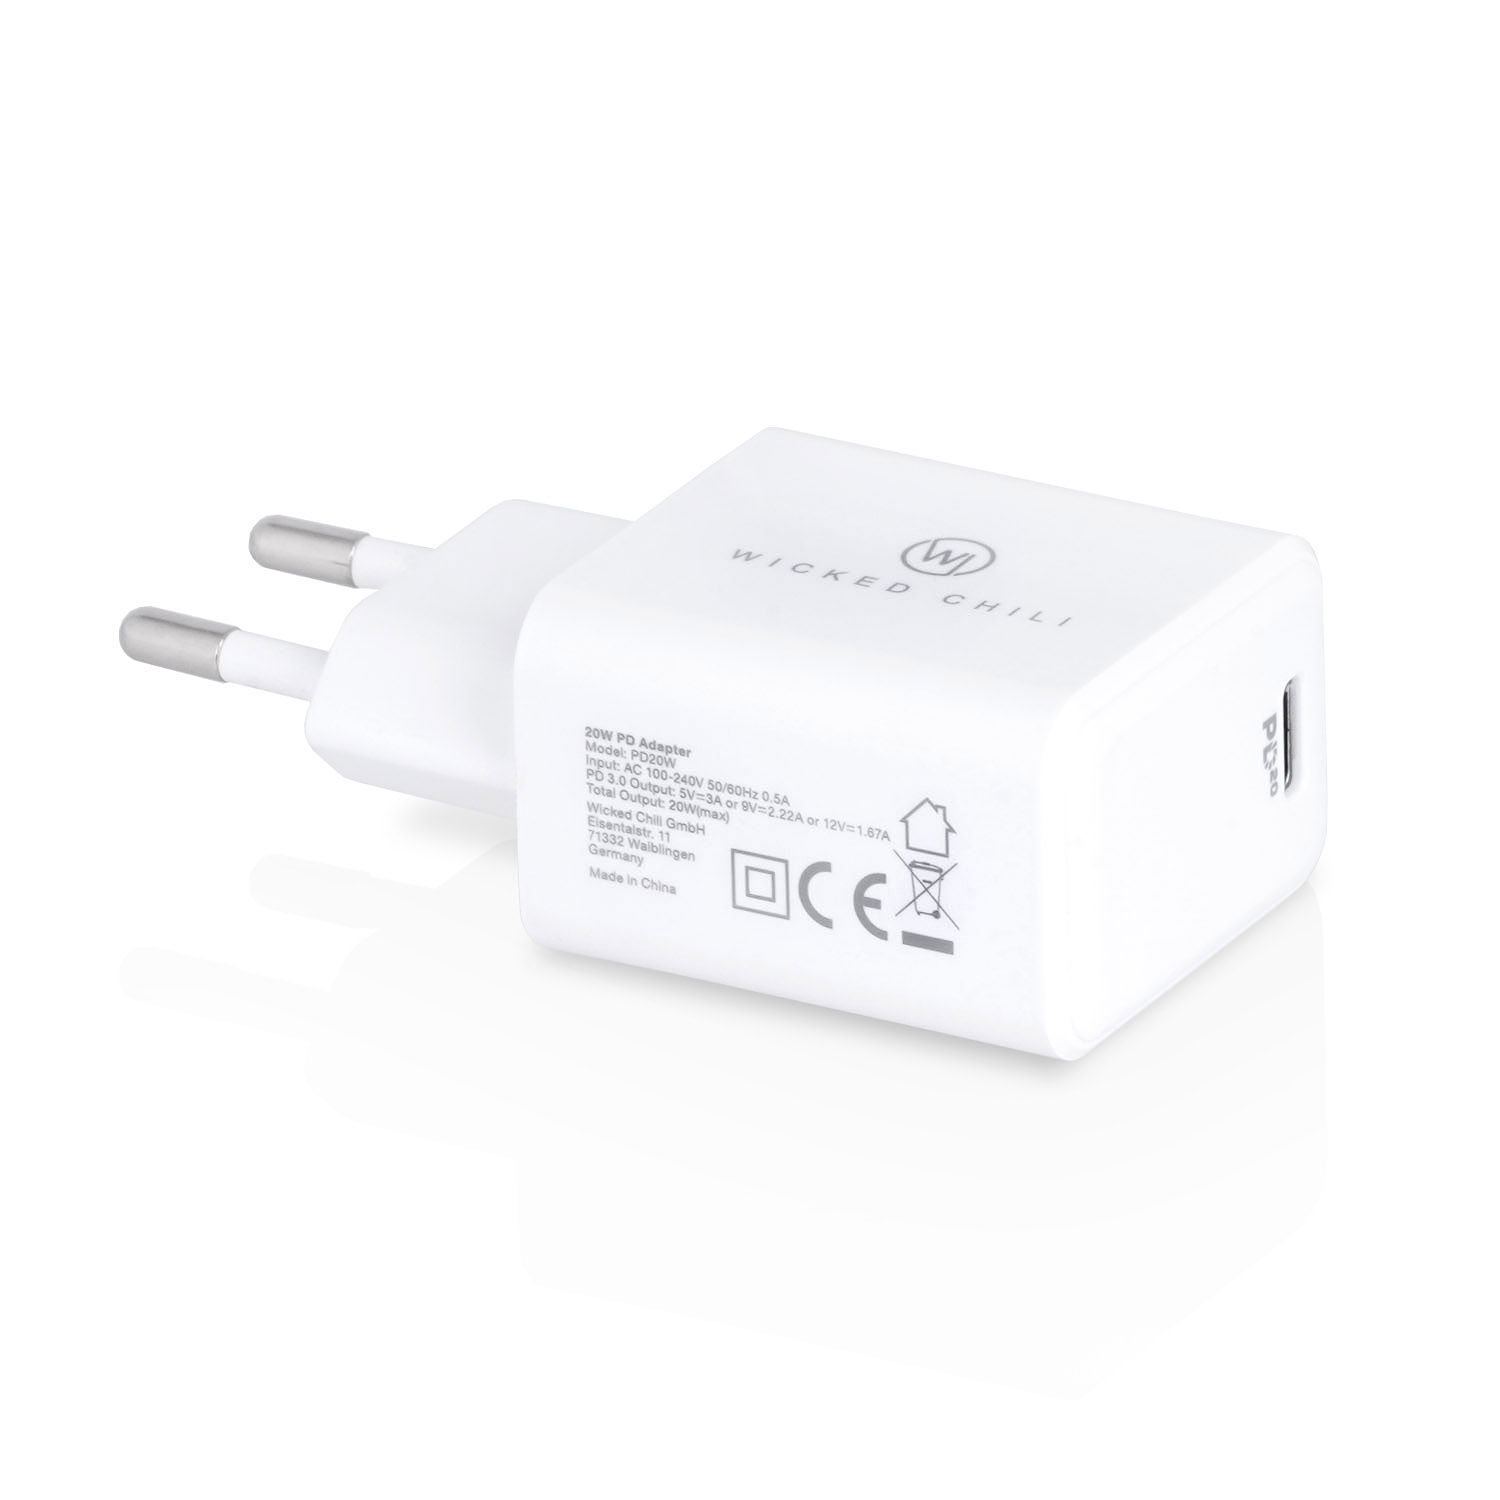 13, Ladegerät 12, Charge iPhone 11, USB-C WICKED Adapter 20W USB-C Netzteil CHILI MagSafe Fast für Ladeadapter 14, Adapter Power